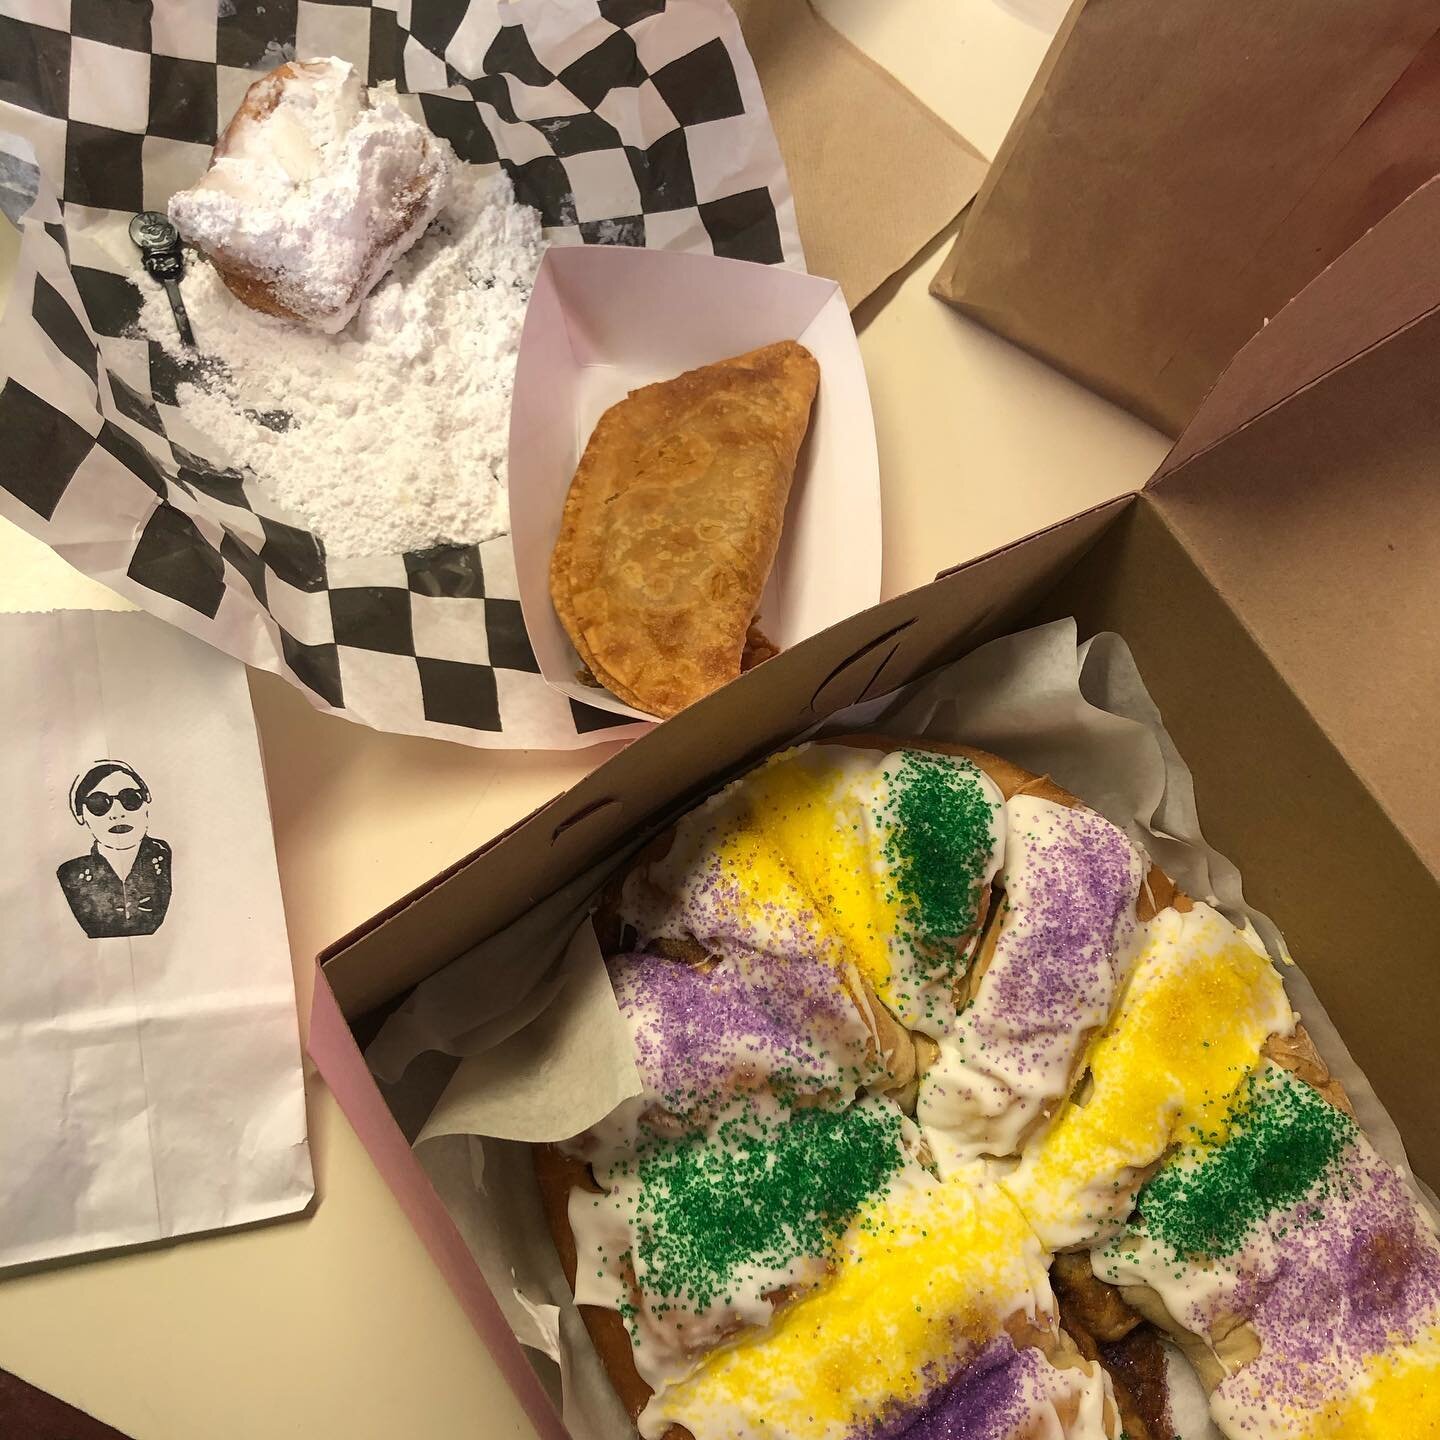 Our employees enjoyed an awesome lunch from @junebugchicago ! We had meat pies, beignets, gumbo(not pictured), and king cake! Check this place out! They&rsquo;re soo good! #shoplocal #supportsmallbusiness #junebugcafe #hagensfishmarket